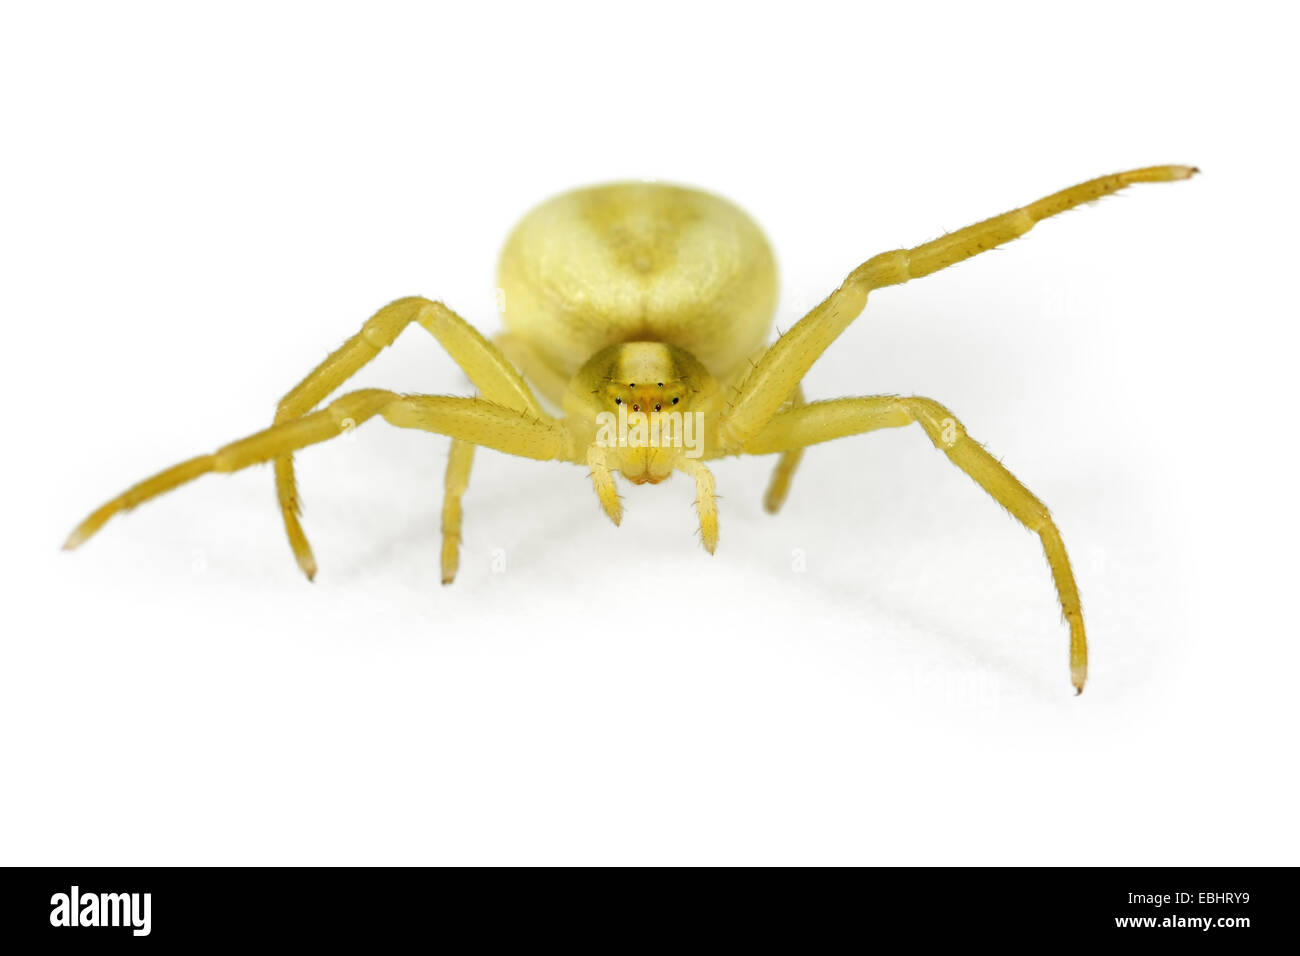 A female Goldenrod Crab spider, Misumena vatia, on a white background. Part of the family Thomisidae, Crab spiders. Stock Photo